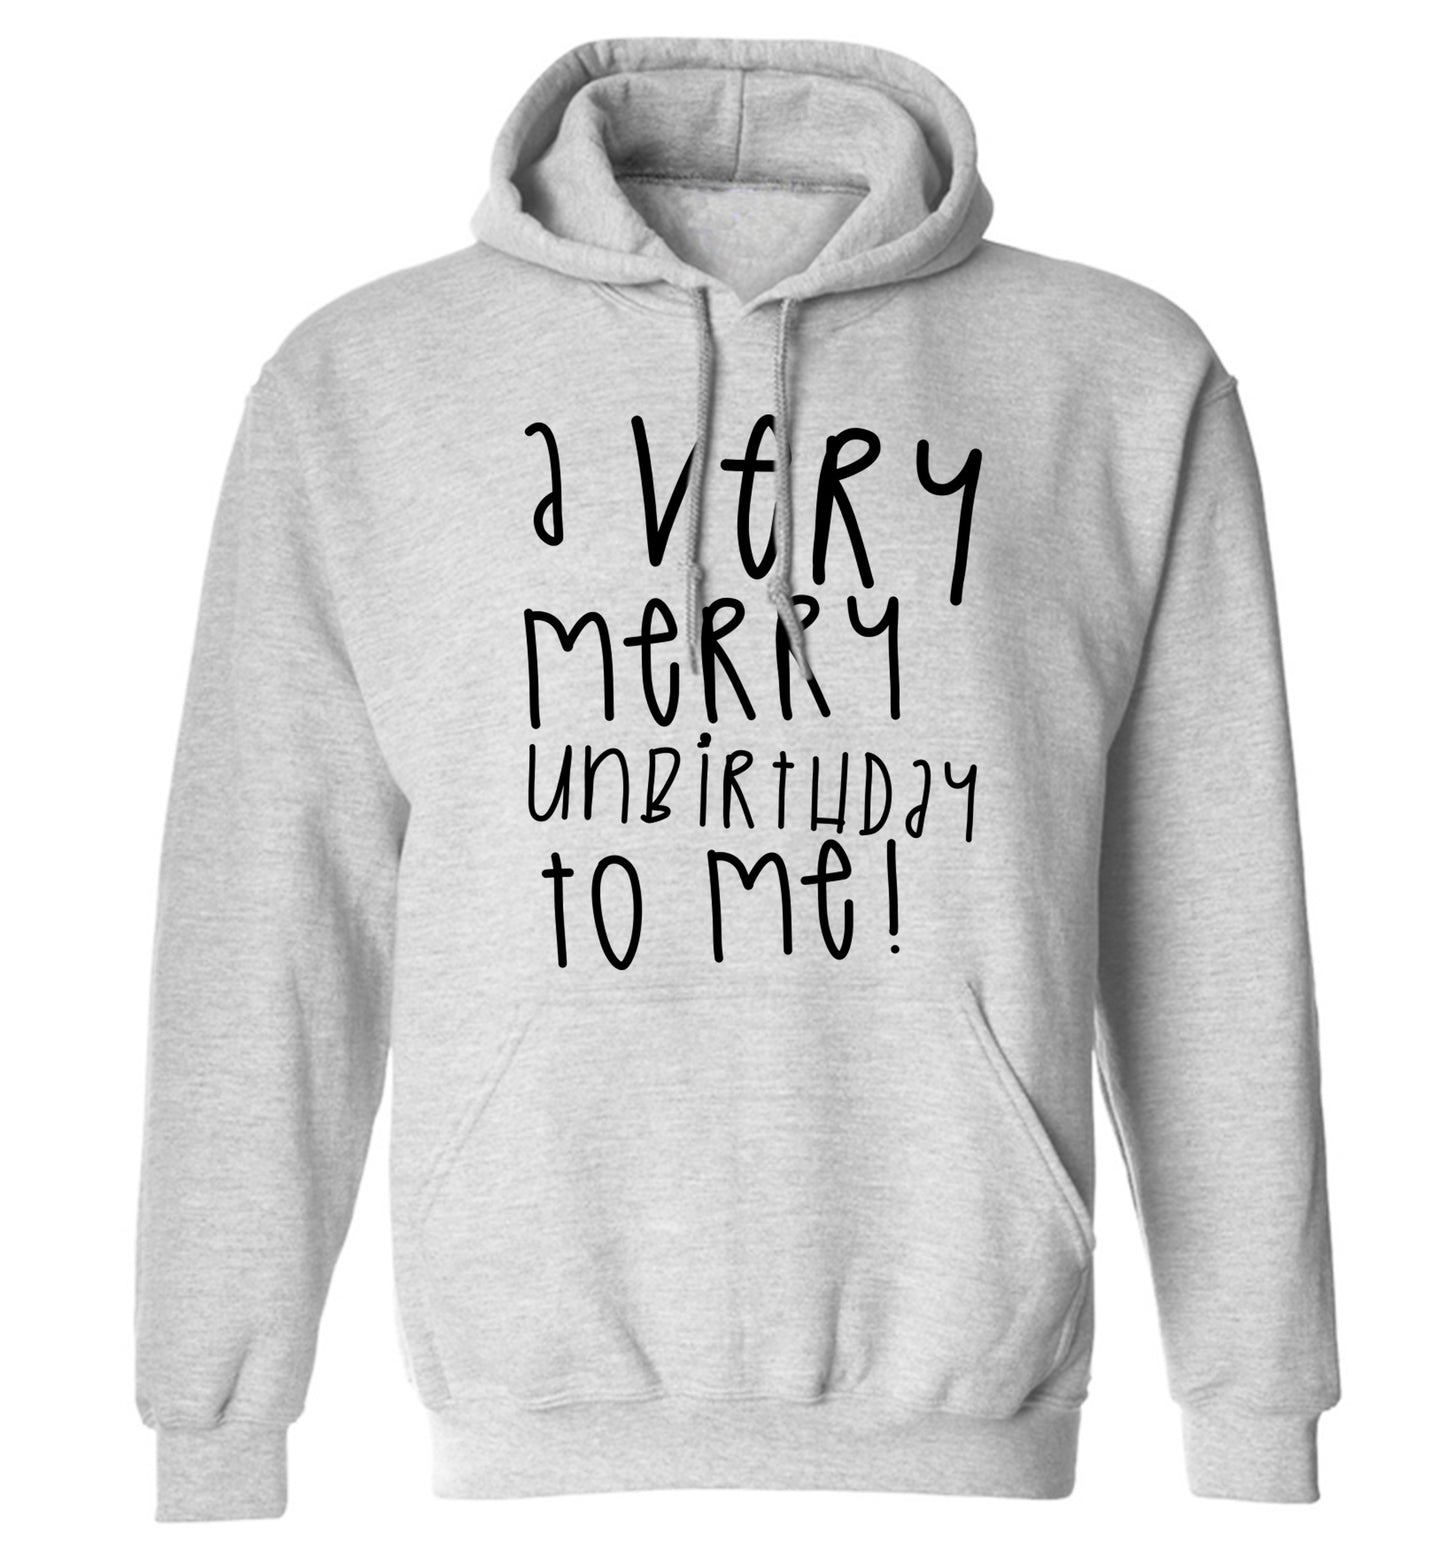 A very merry unbirthday to me! adults unisex grey hoodie 2XL